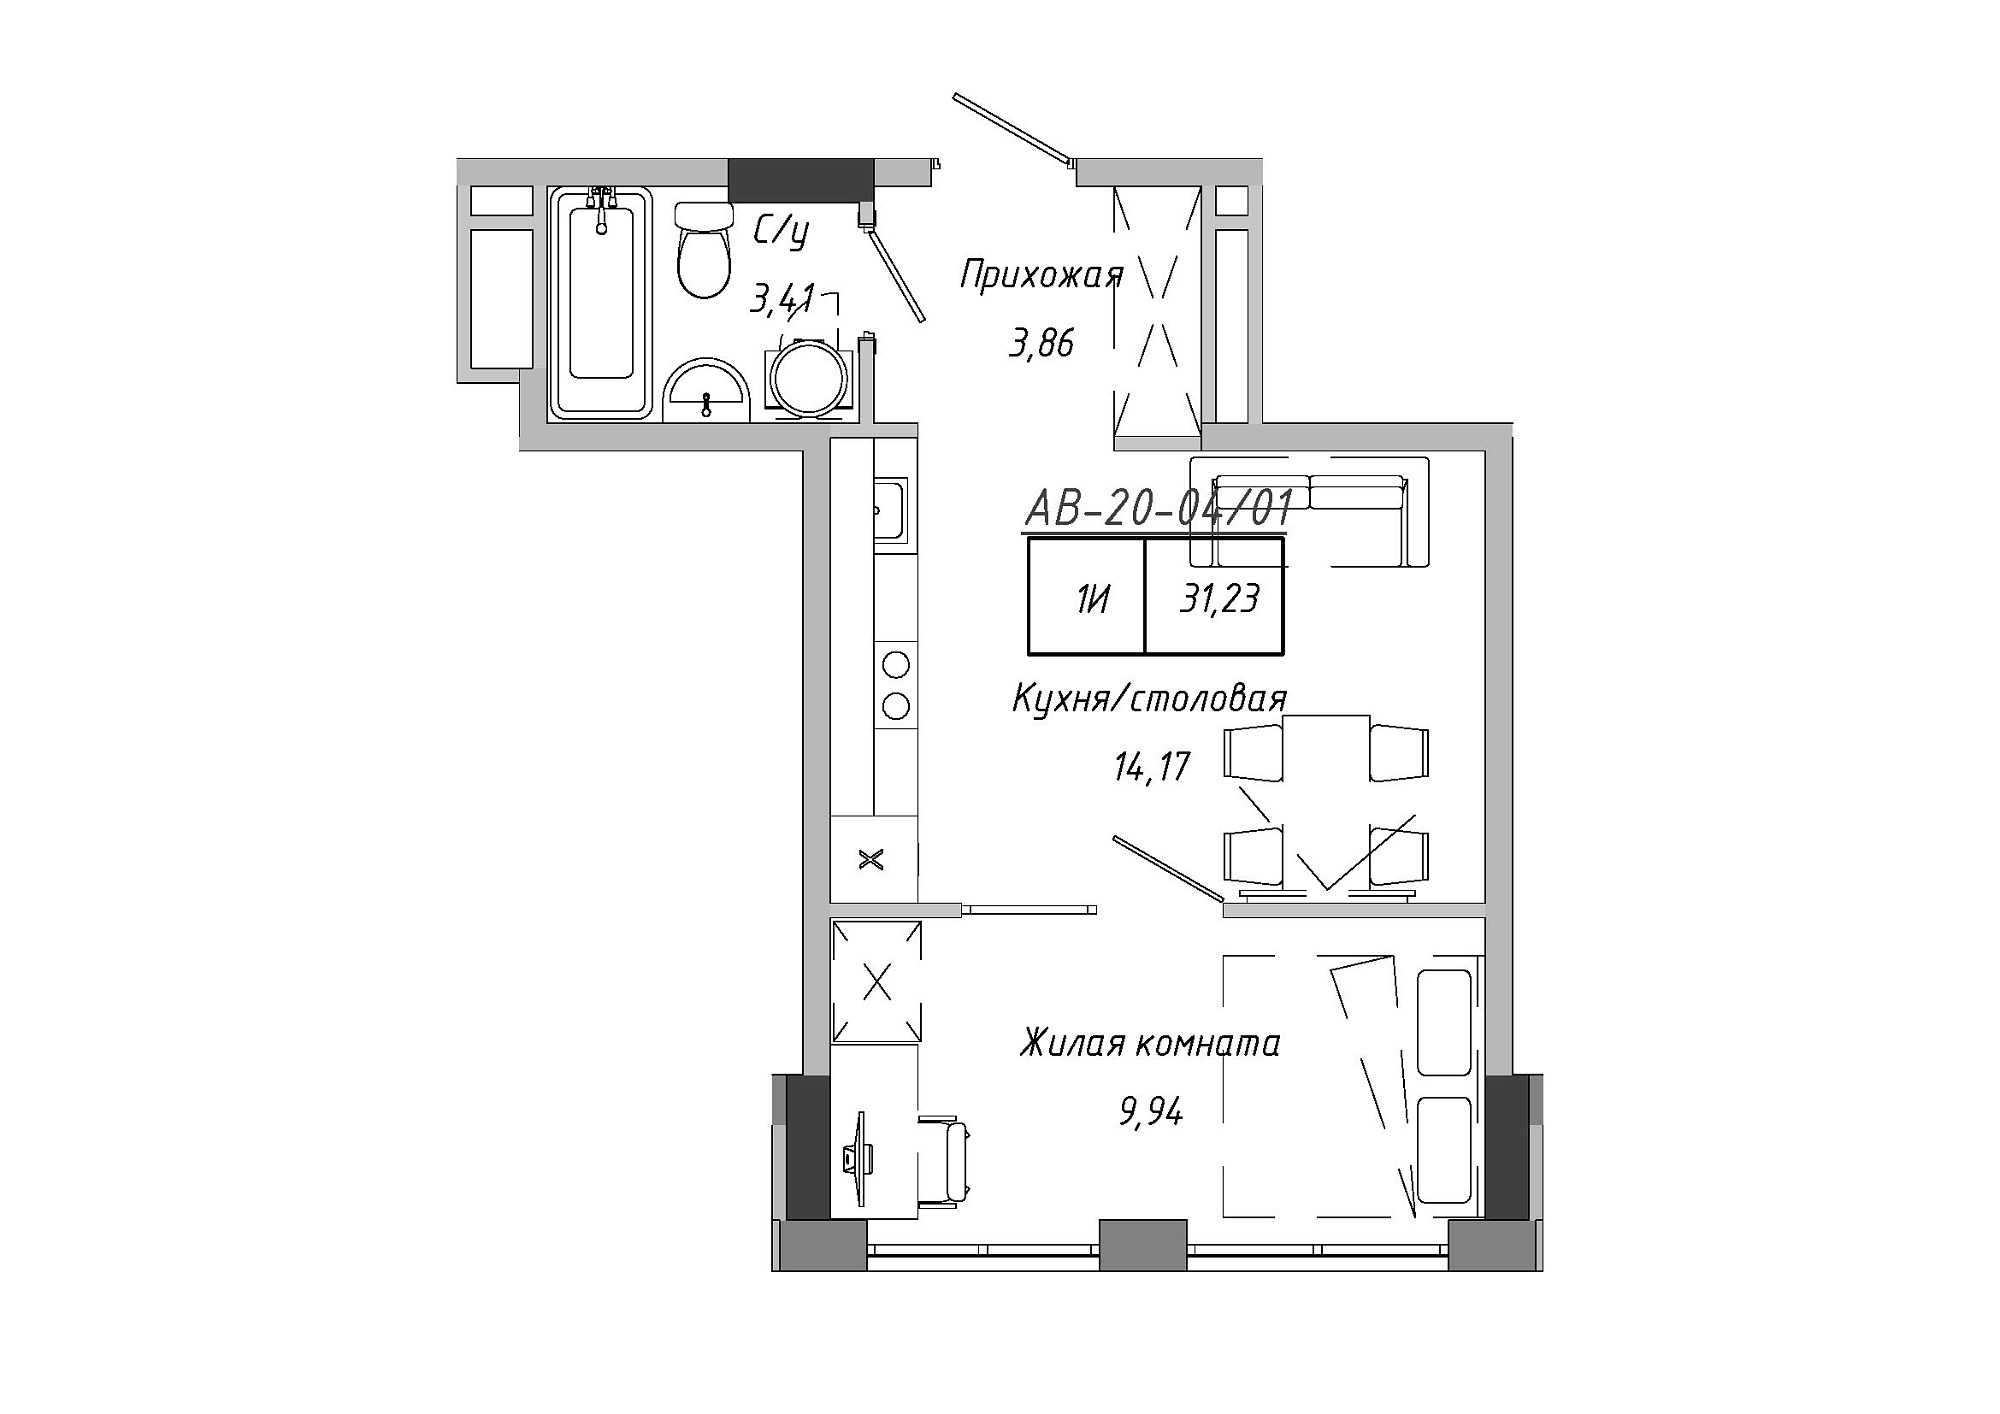 Planning 1-rm flats area 31.23m2, AB-20-04/00001.